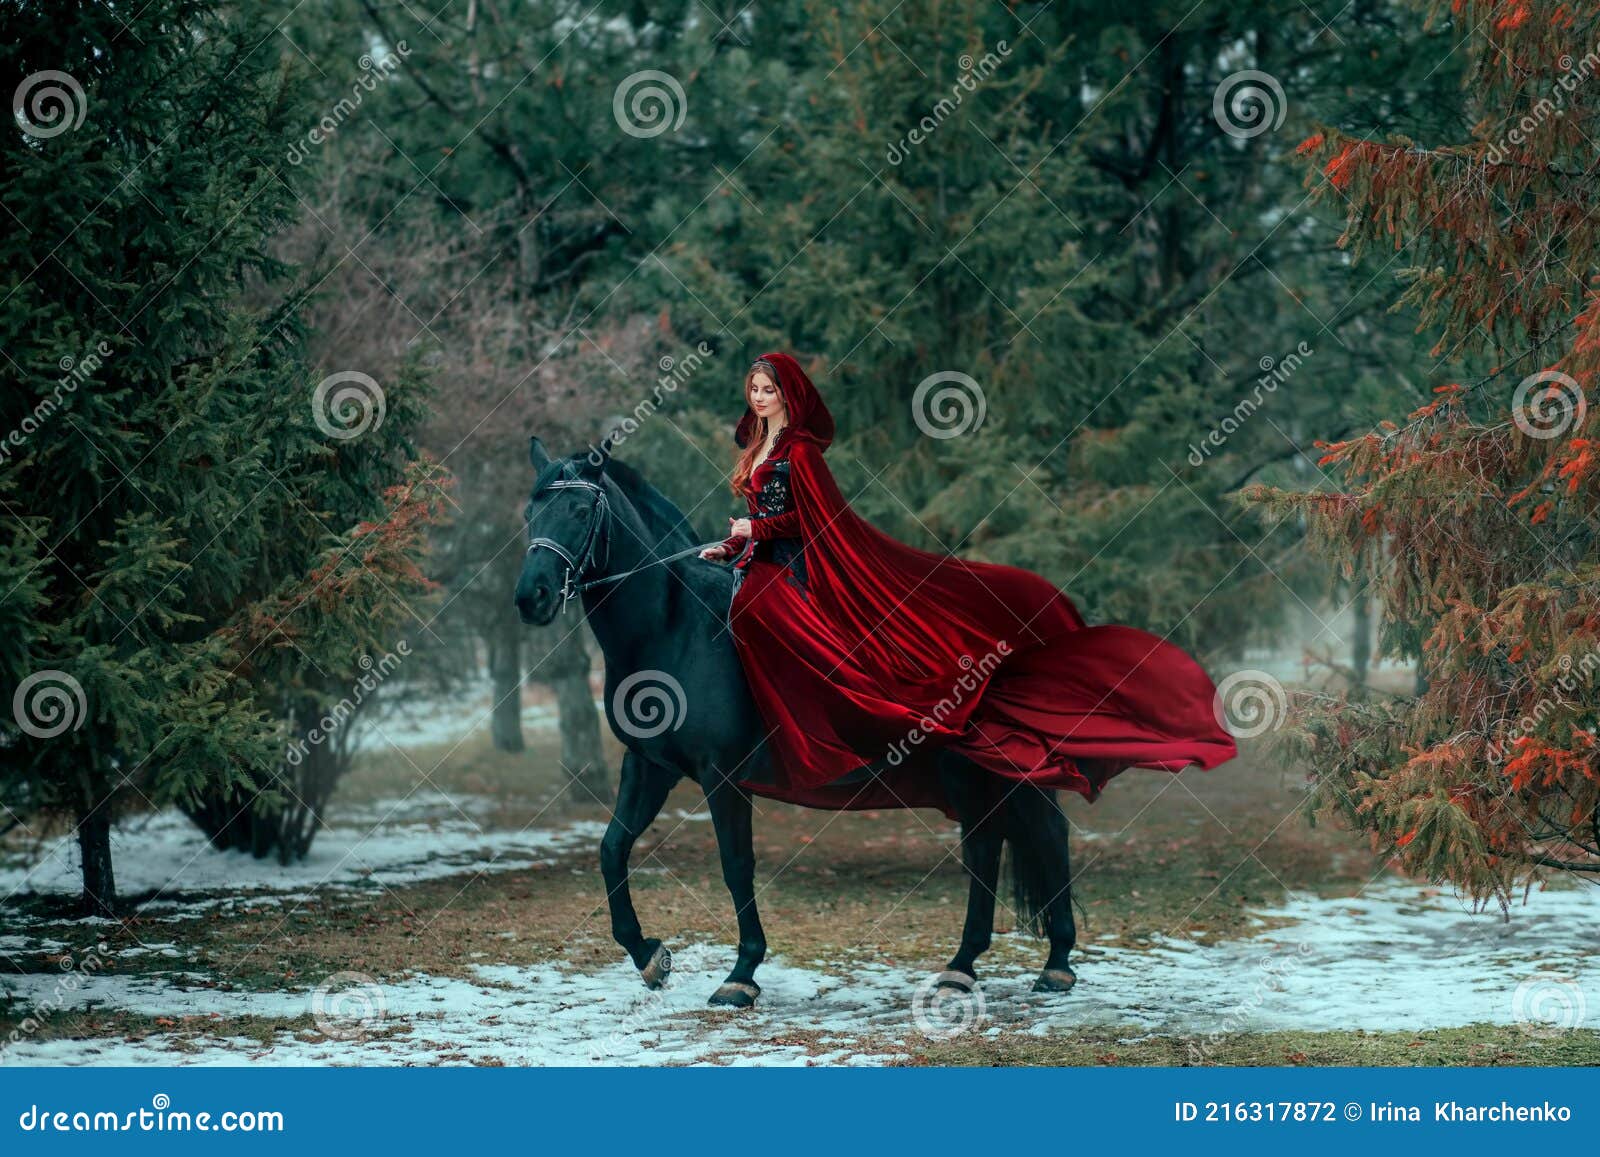 medieval woman princess in red dress sits astride black steed horse. girl rider in vintage cloak cape train flies in